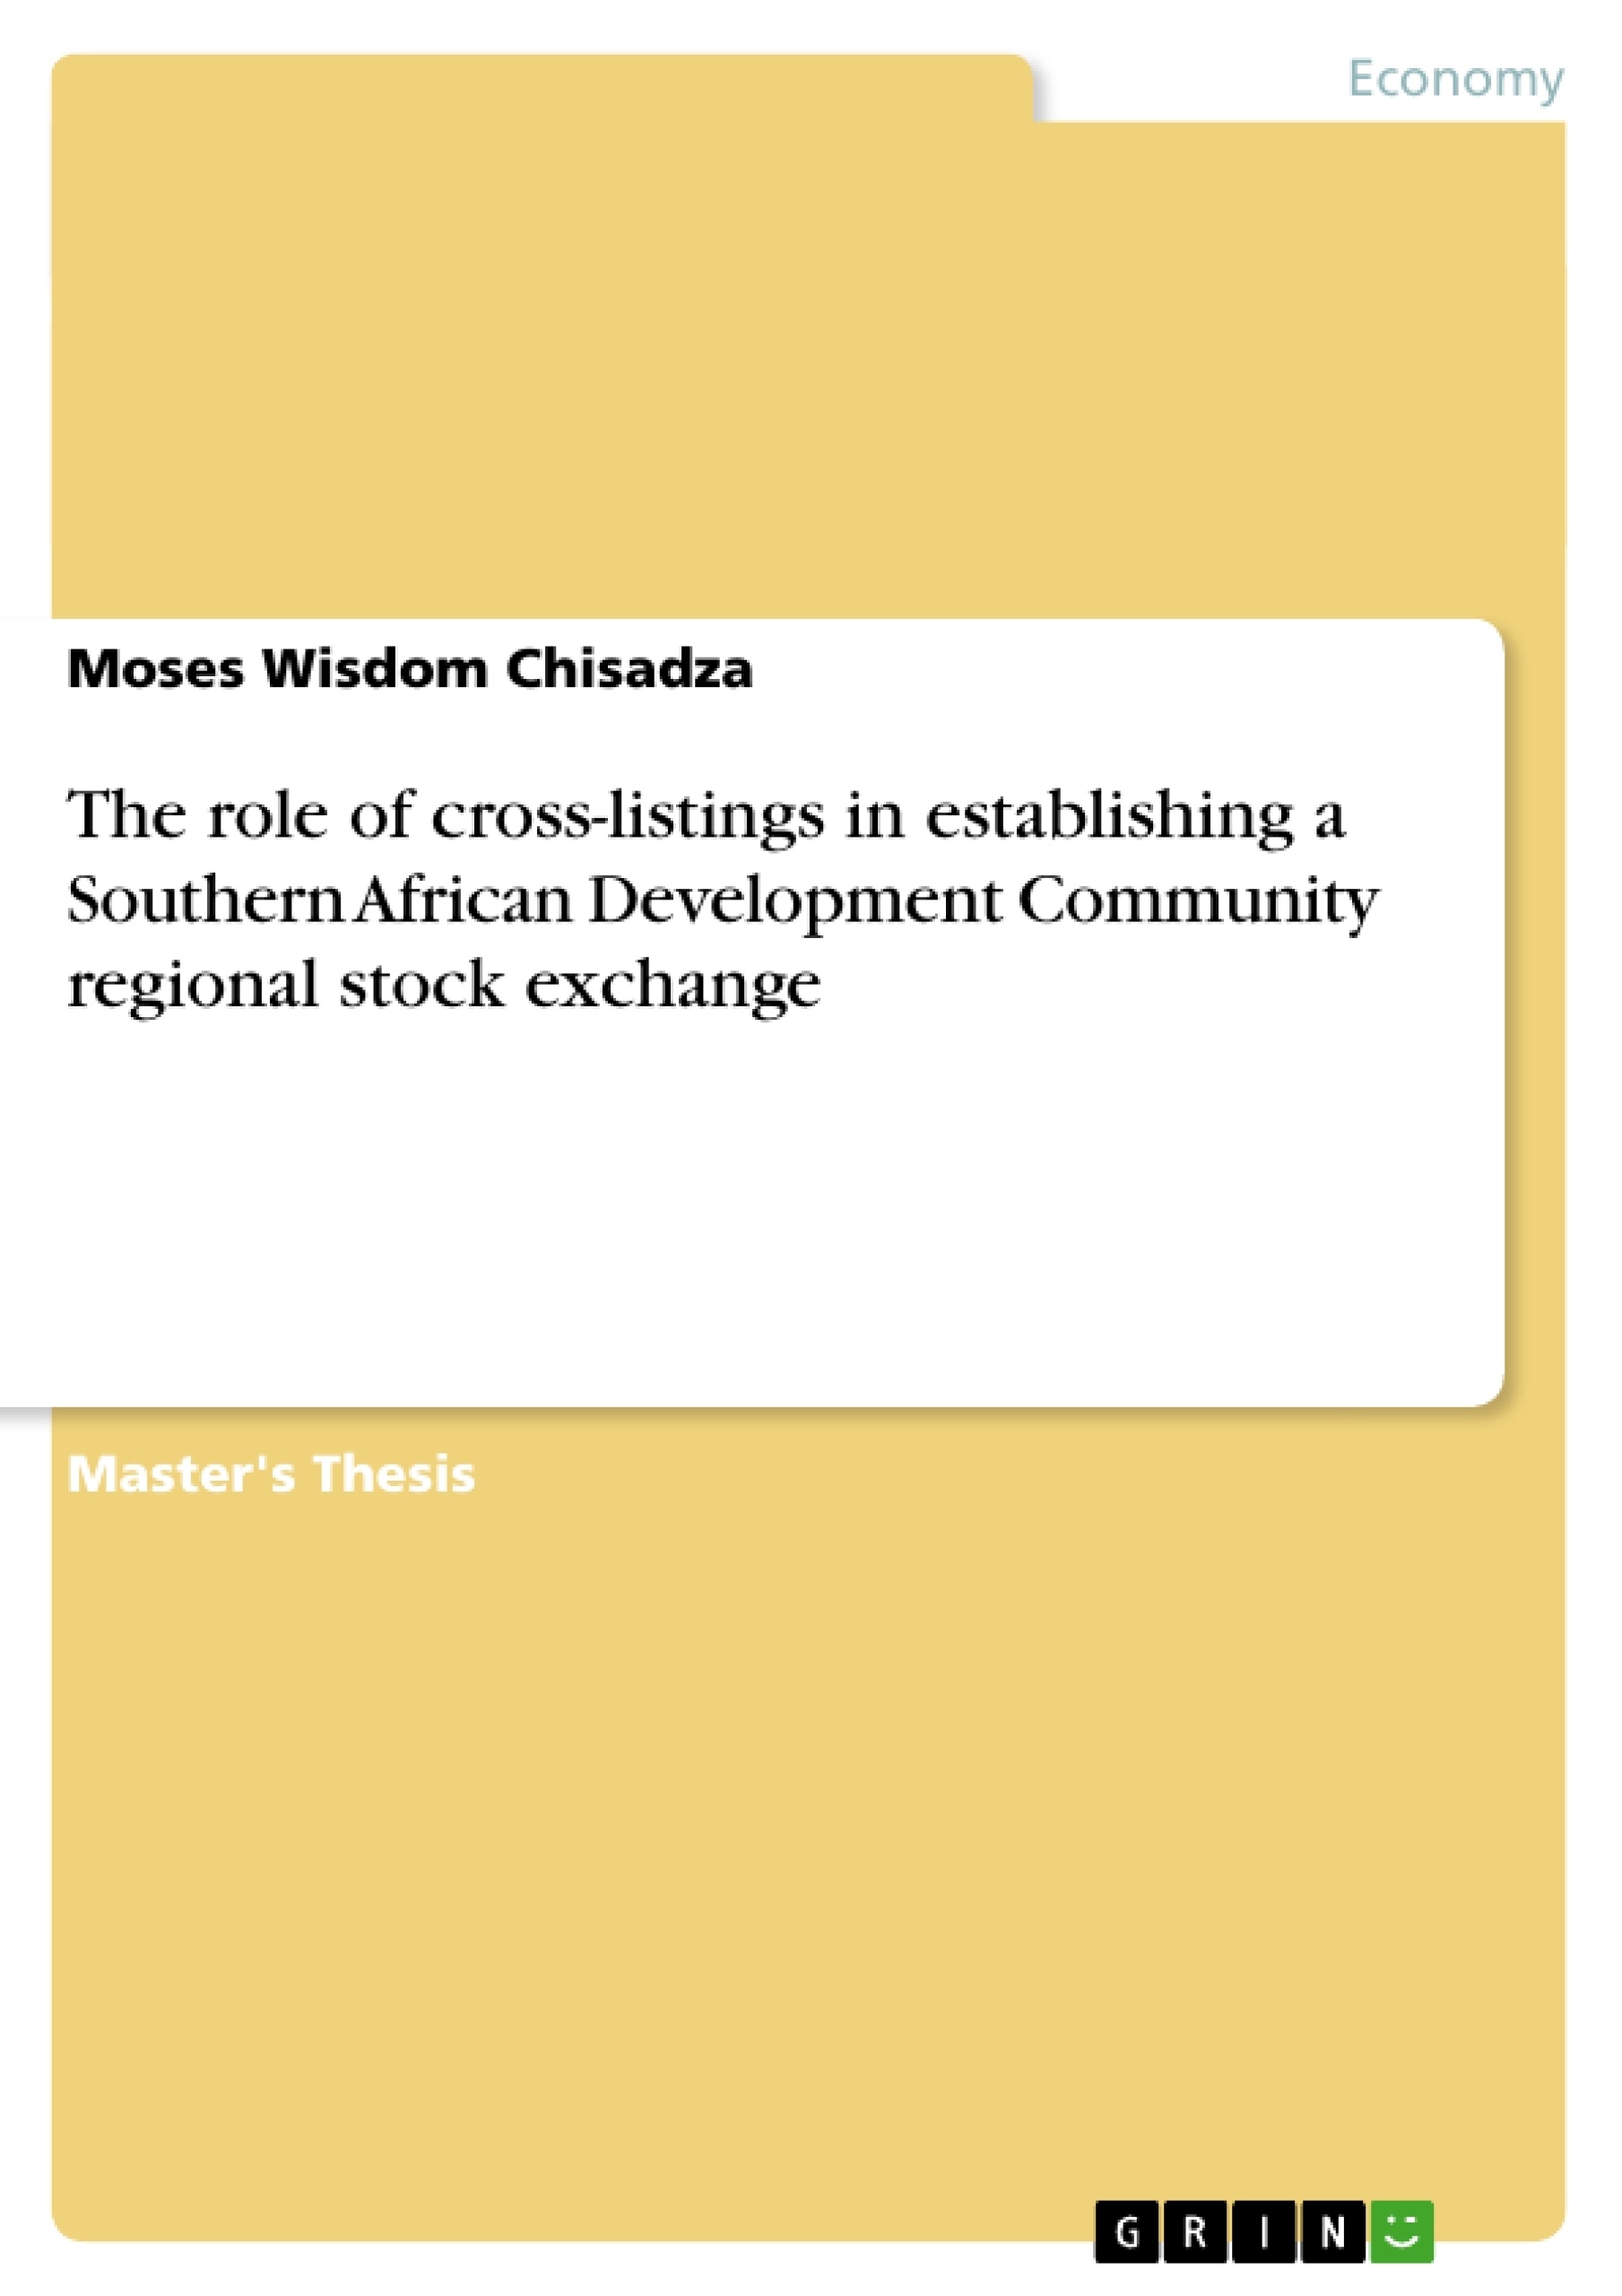 Título: The role of cross-listings in establishing a Southern African Development Community regional stock exchange